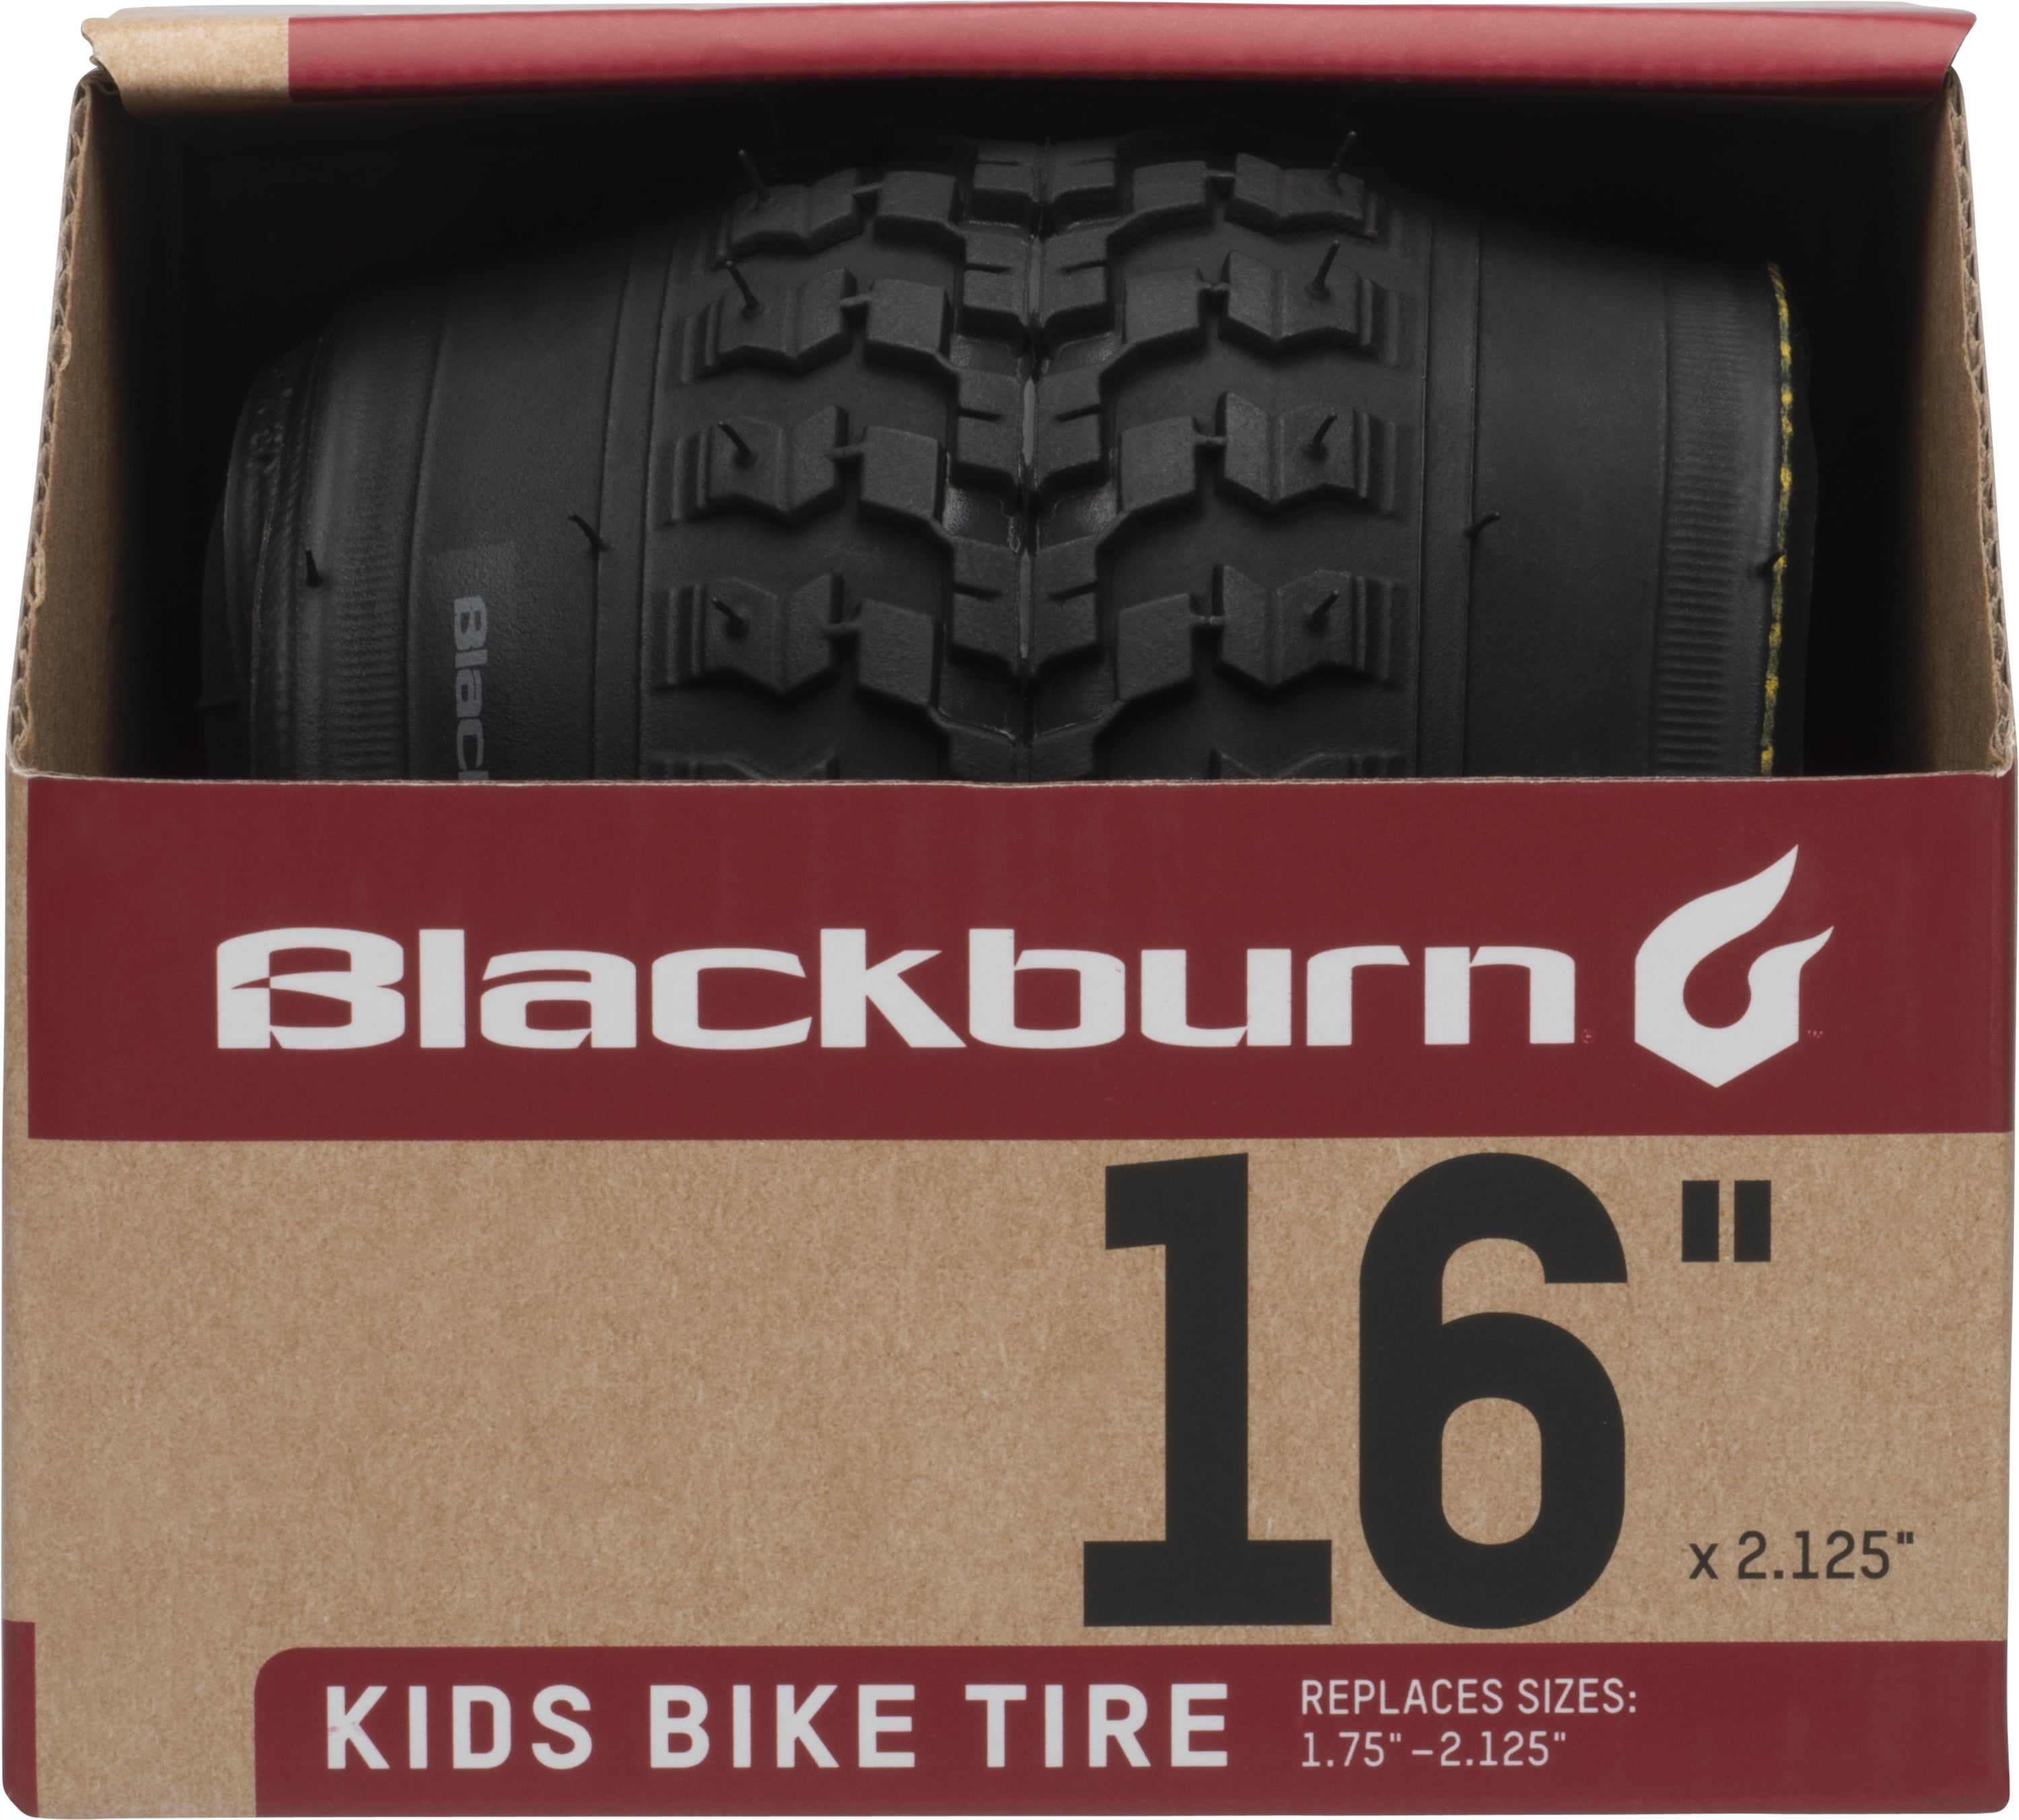 Details about   BELL KIDS BIKE TIRE 16” BICYCLE TIRE 16" X 2.125" 